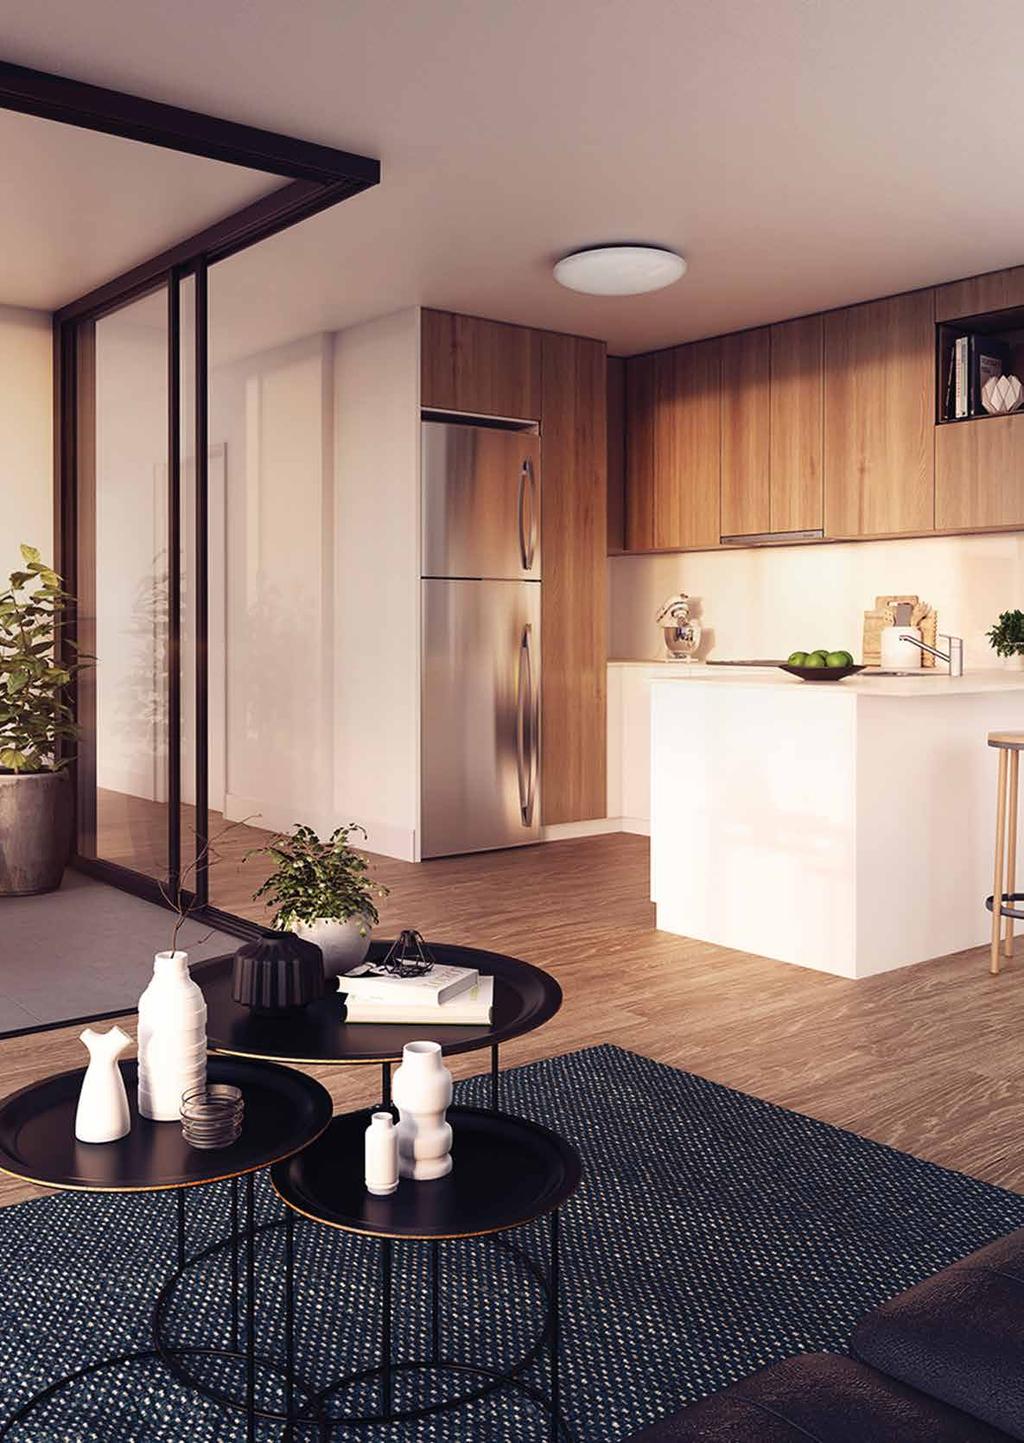 The Apartments SPACE & STYLE CNR ST PAULS TCE & BAXTER STREET, FORTITUDE VALLEY Baxter St Apartments will create a stylish new standard in